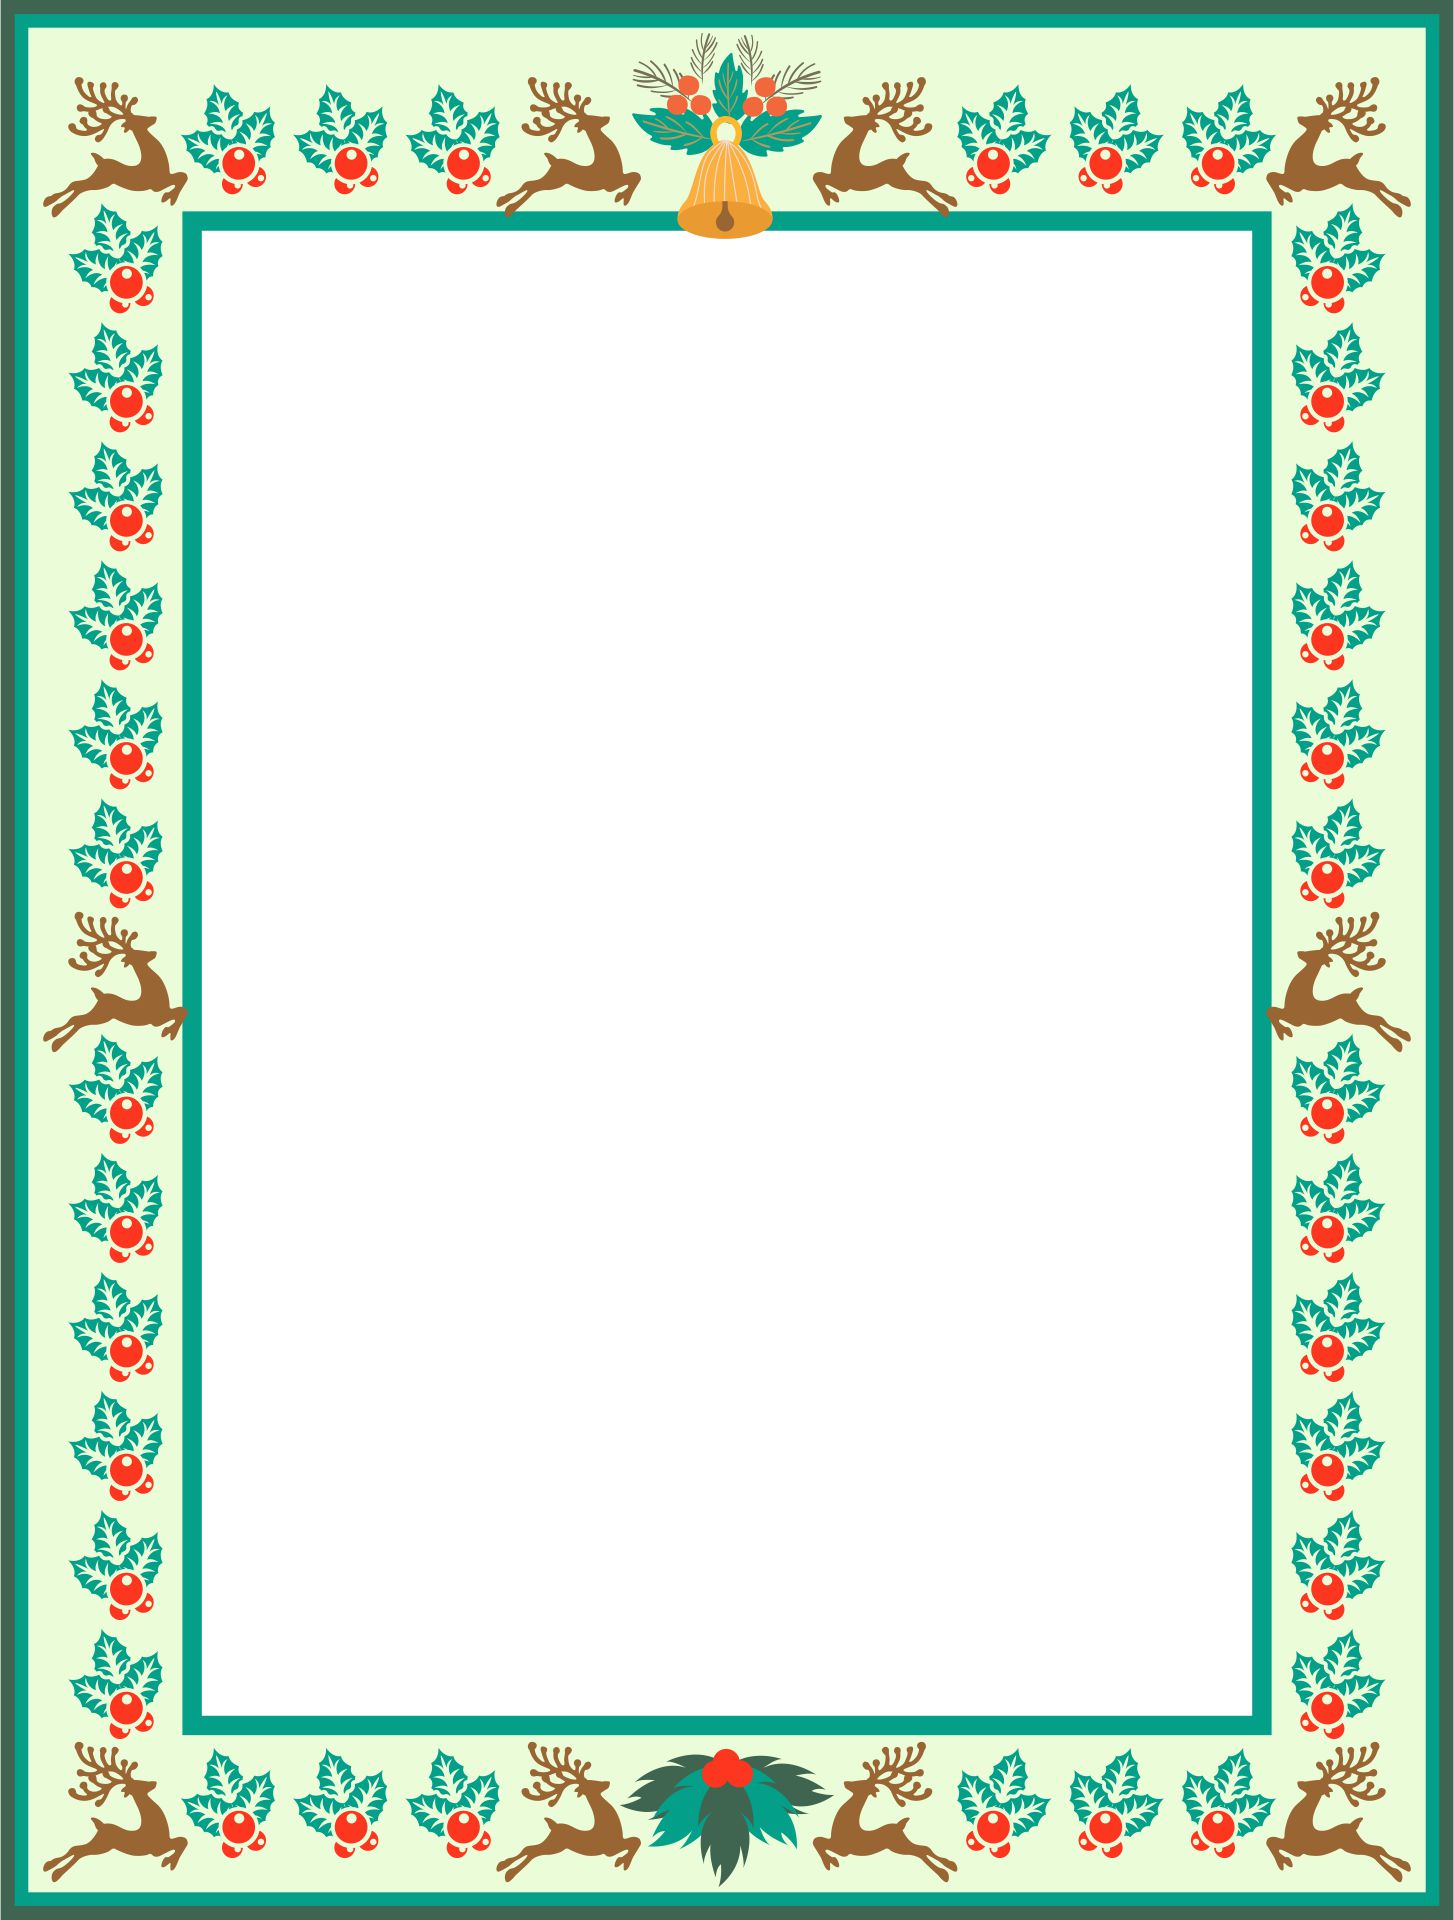 Printable Whimsy Reindeer With Green Border Stationery